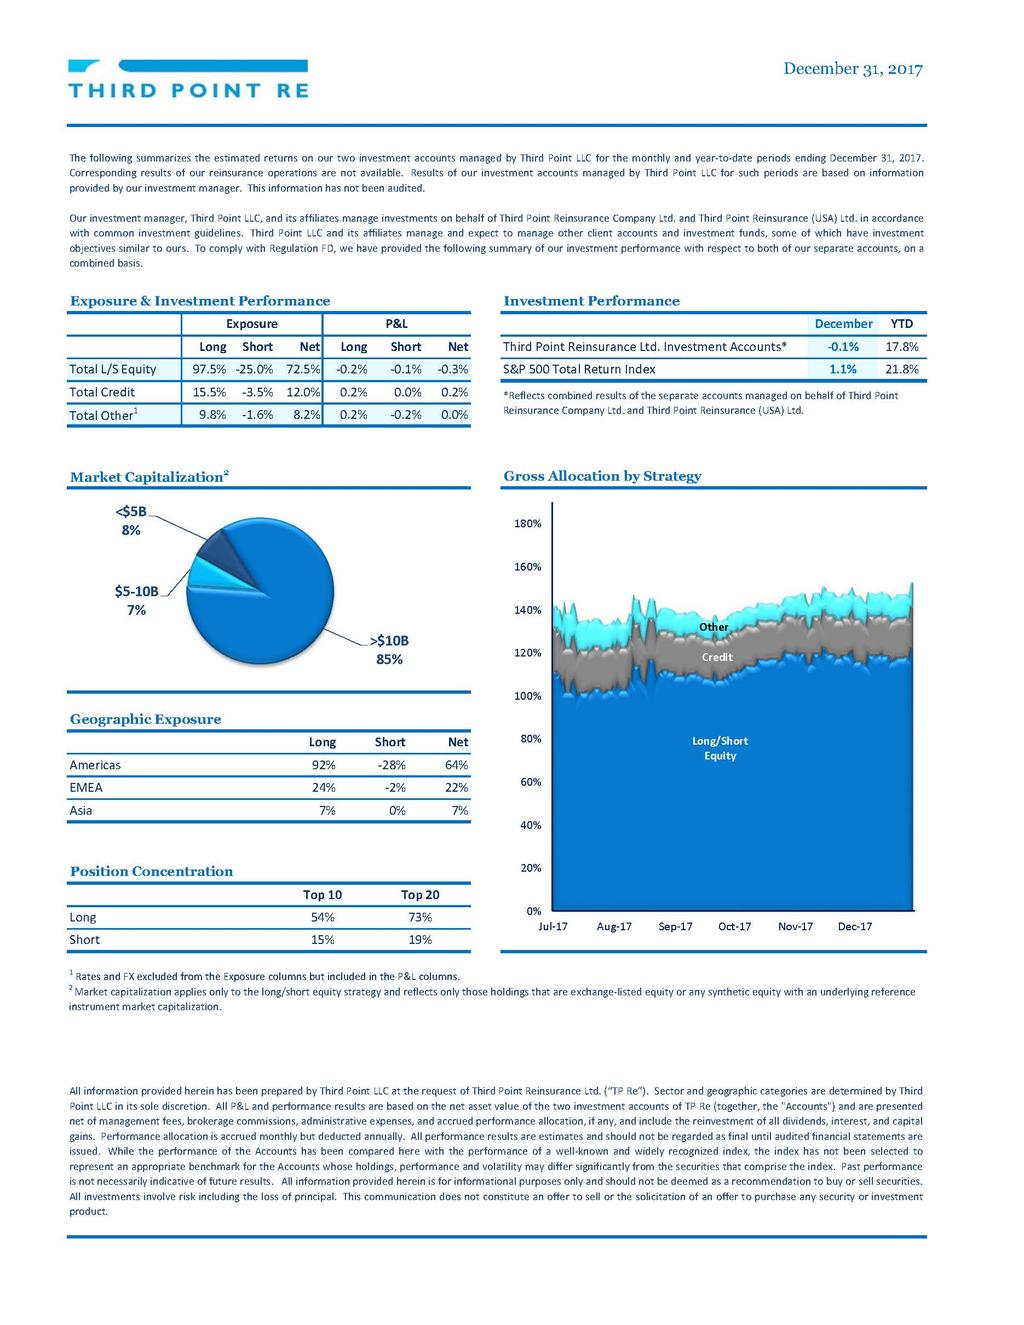 THIRD POINT LLC PORTFOLIO RISK MANAGEMENT Portfolio diversification across industries, geographies, asset classes and strategies Highly liquid portfolio investment manager can dynamically shift